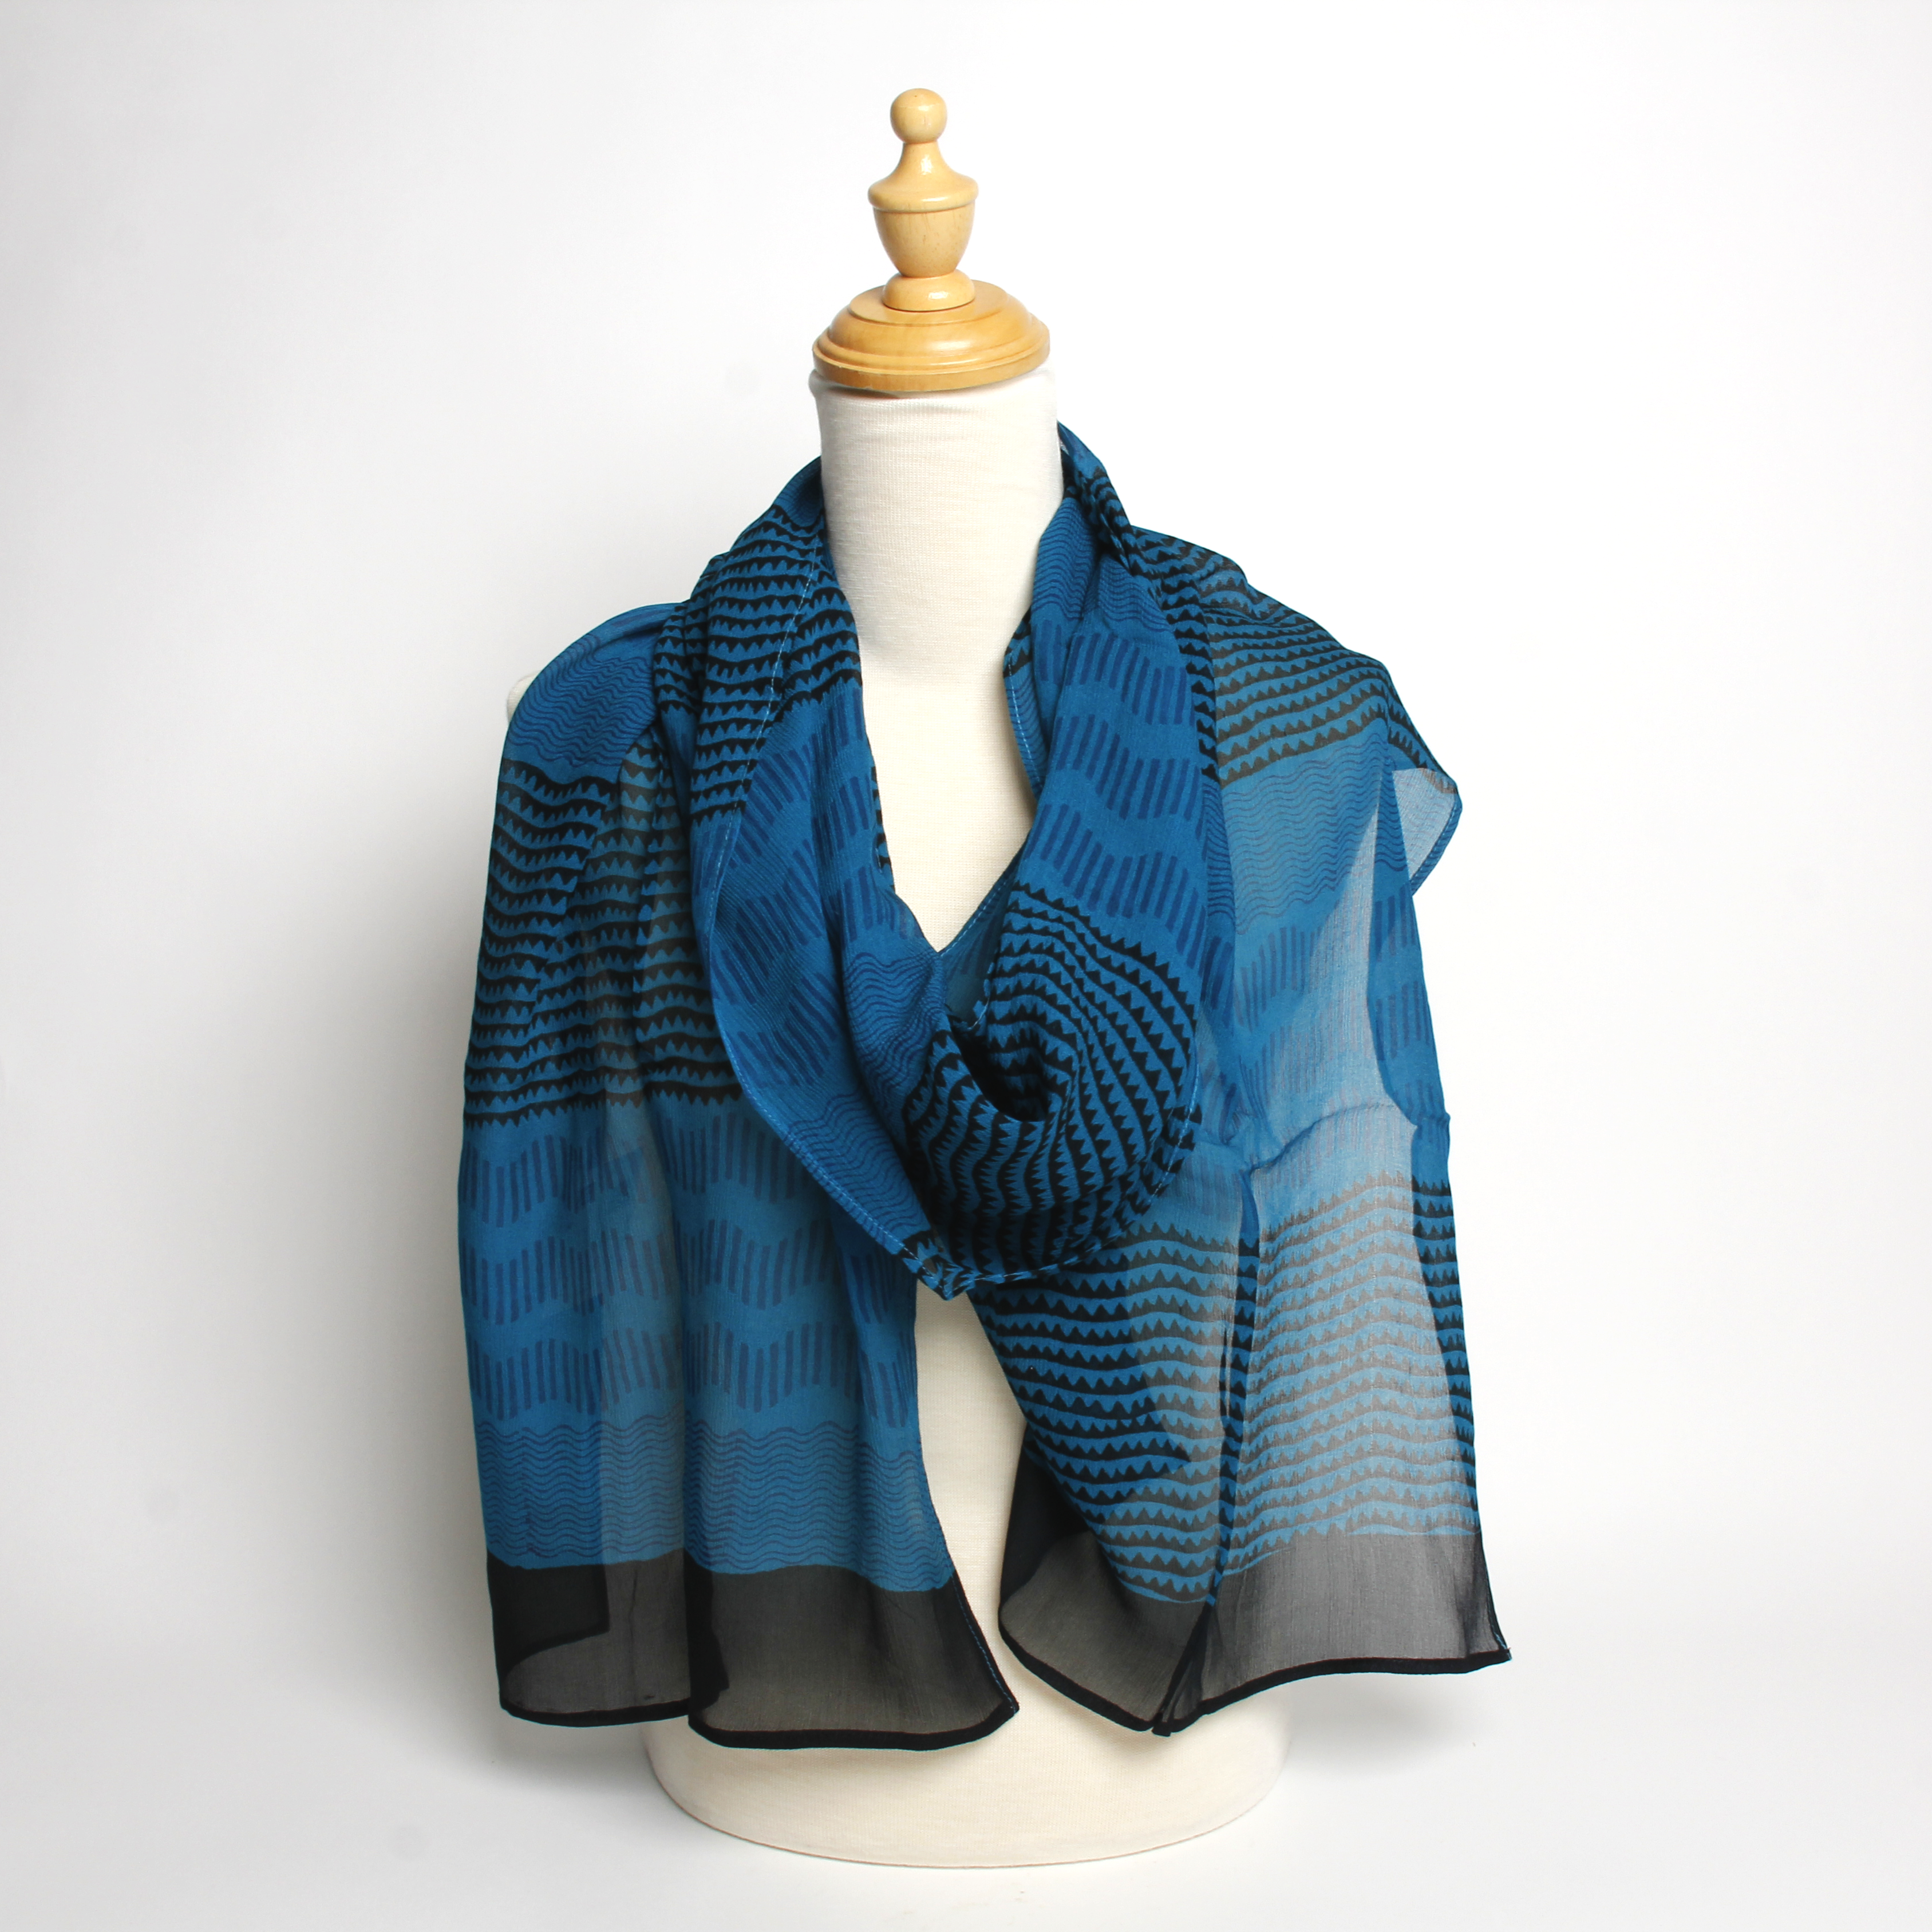 Harshita Designs: Peacock Scarf Product Image 1 of 1